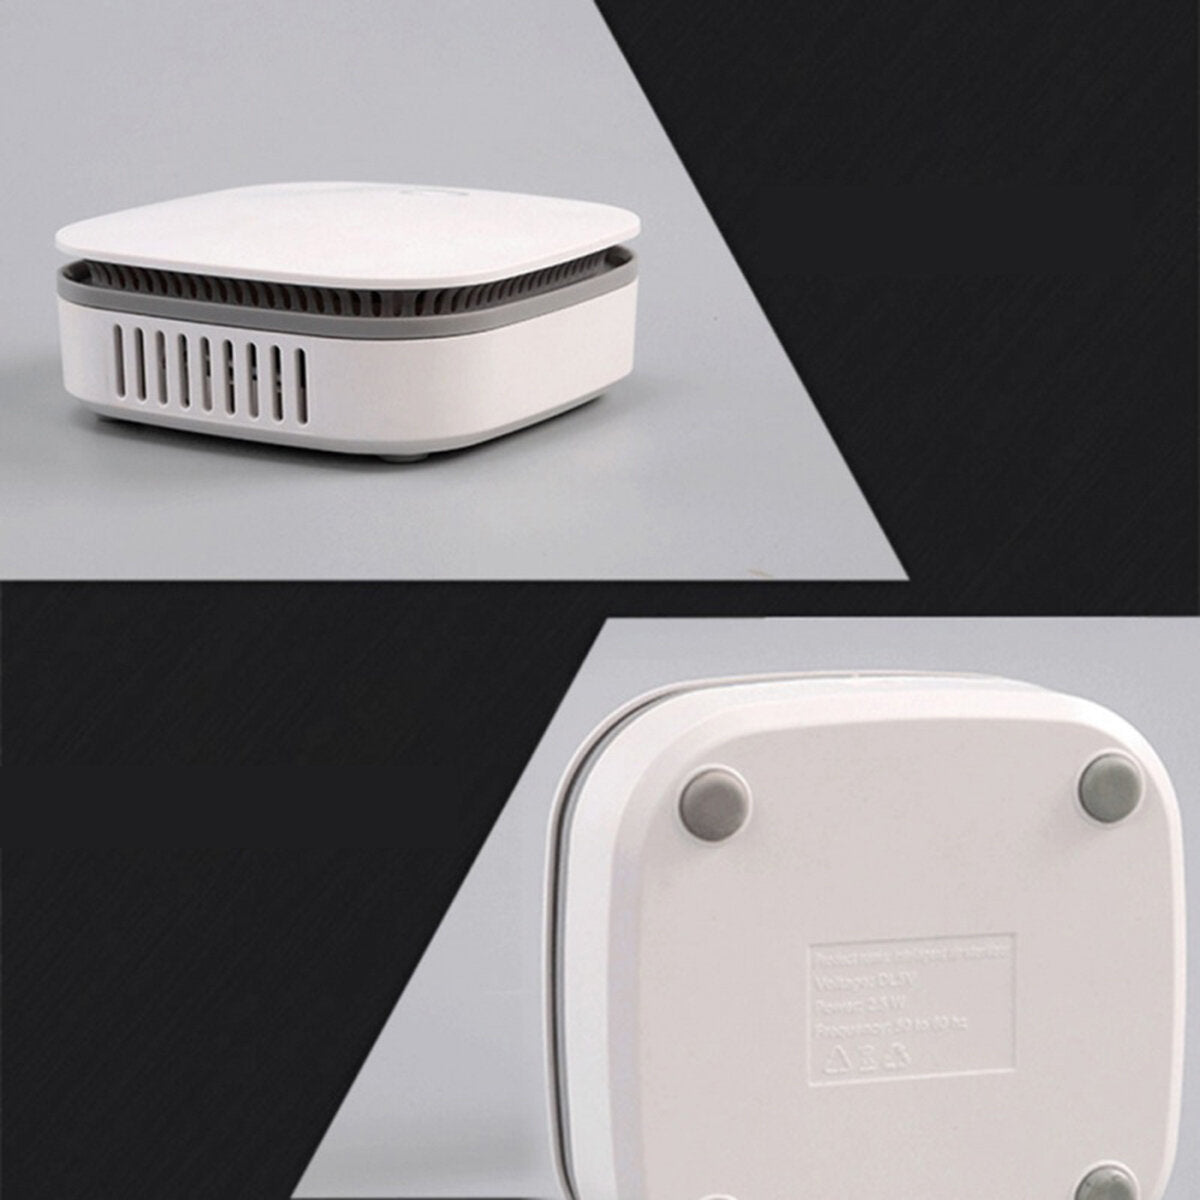 Mini Air Purifier Portable Air Cleaner Ozone Anion Generator USB Rechargeable